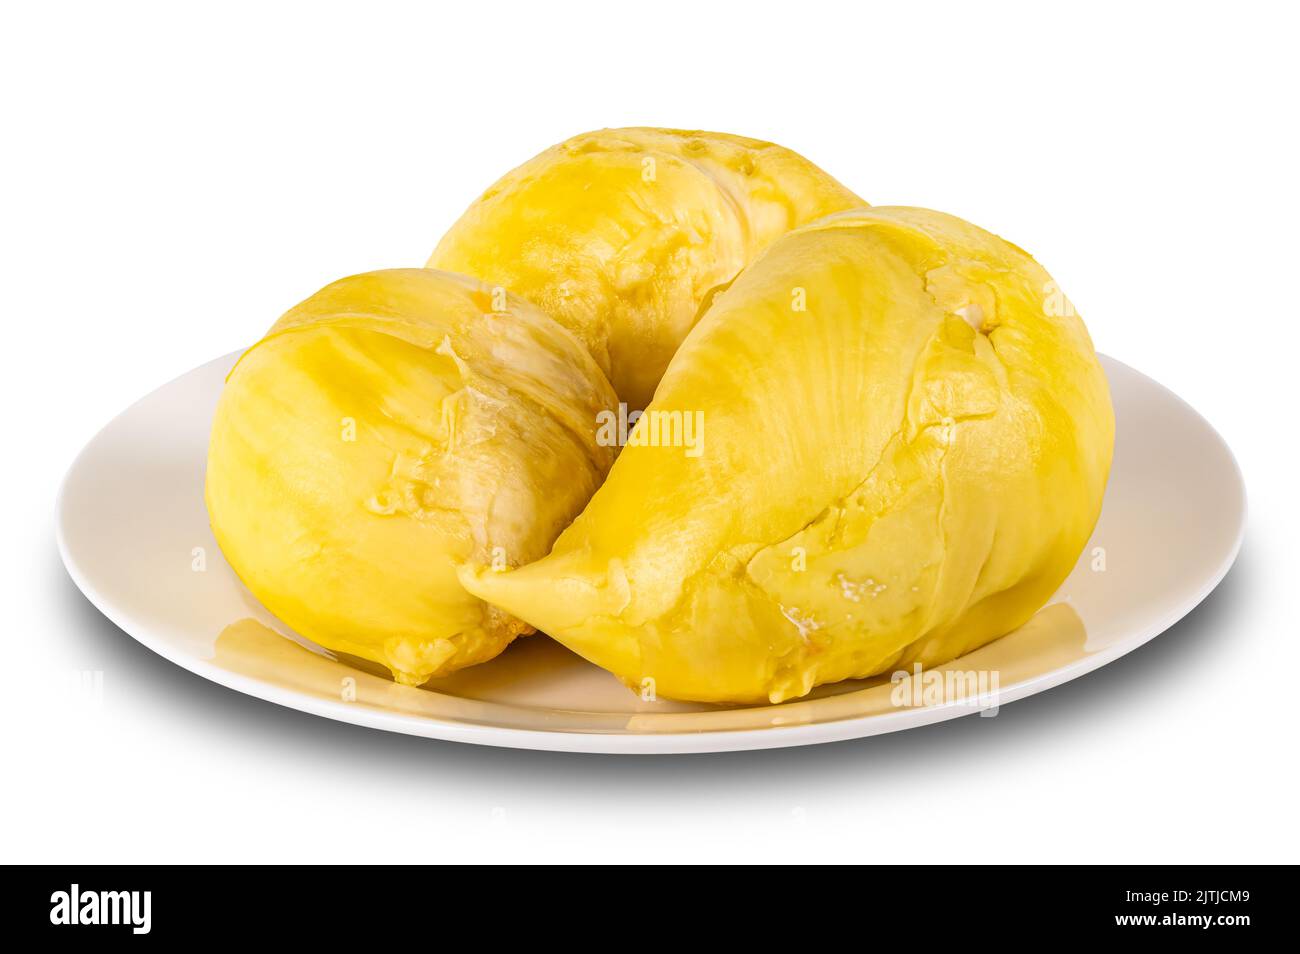 Durian, pulps, king of fruit in white ceramic dish isolated on white background with clipping path. Stock Photo